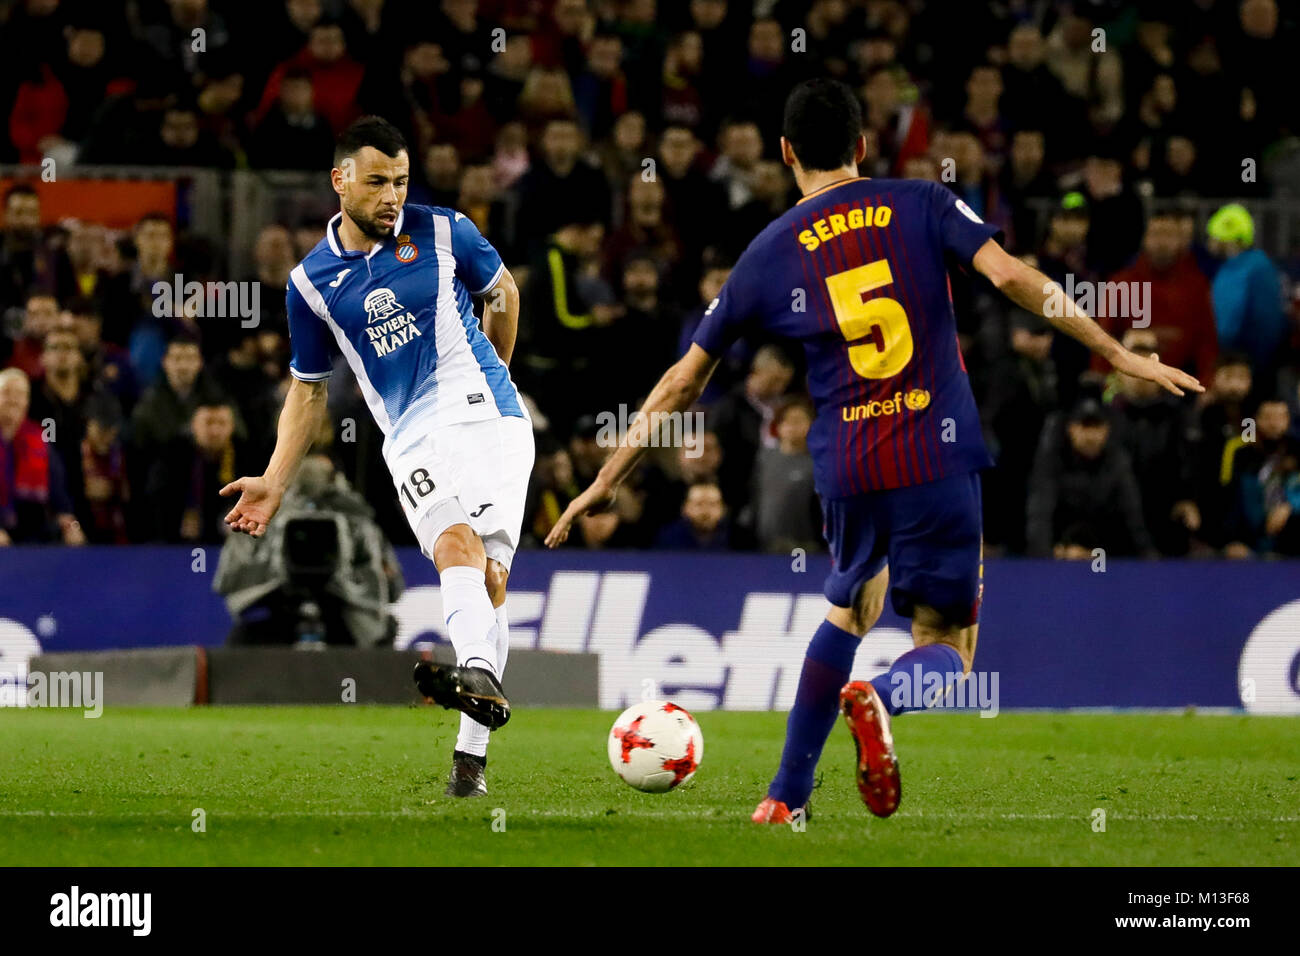 Camp Nou, Barcelona, Spain. 25th January, 2018. Javi Fuego kicking a ball during the quarter finals of Copa de S.M. del Rey 17/18 on the match between Fc Barcelona and Rcd Espanyol at Camp Nou, Barcelona, Spain. Credit: G. Loinaz/Alamy Live News Stock Photo